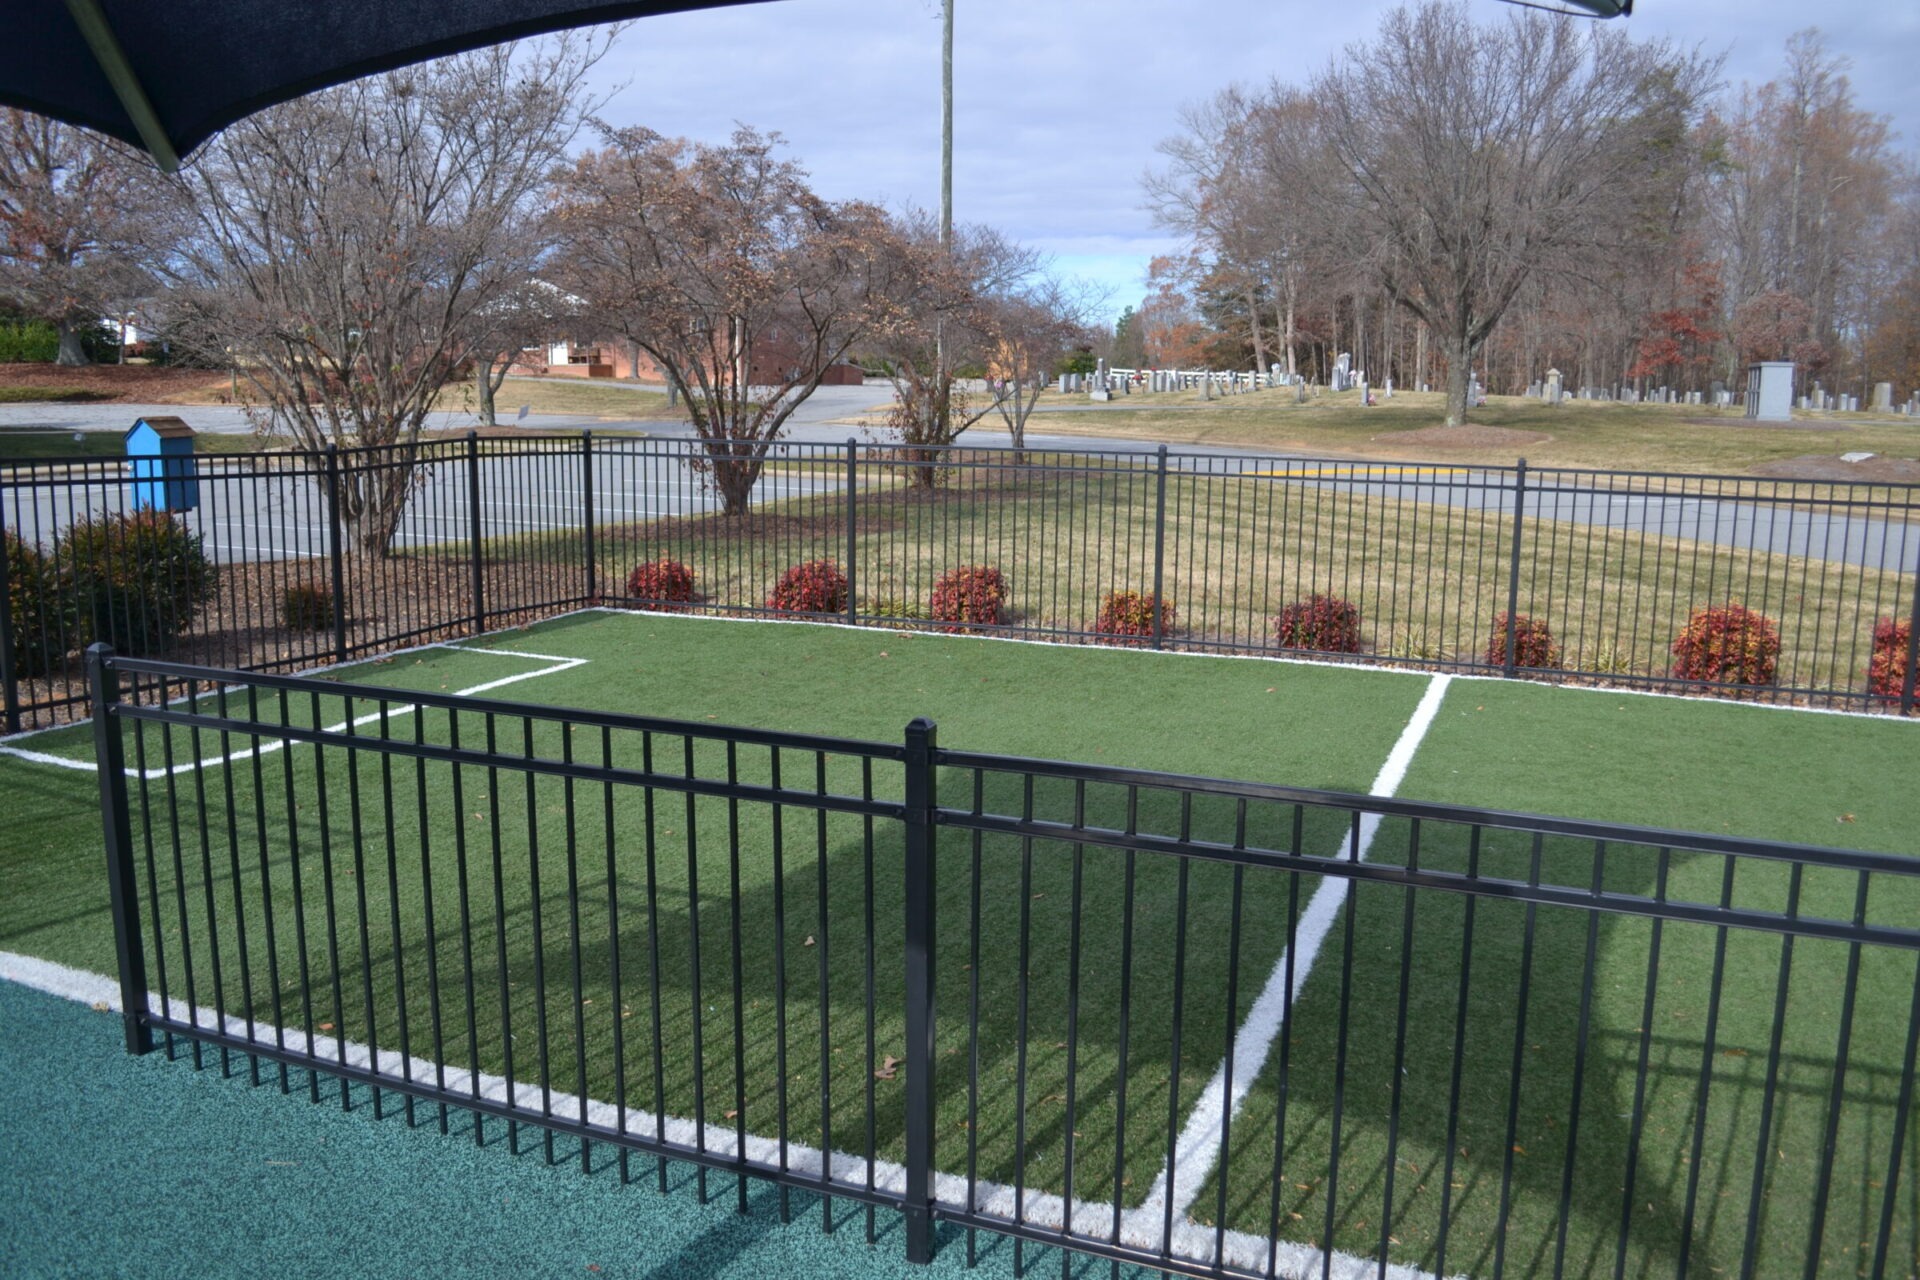 An outdoor view showing a fenced artificial turf area with lines resembling a mini sports field, deciduous trees, and a cemetery in the background.